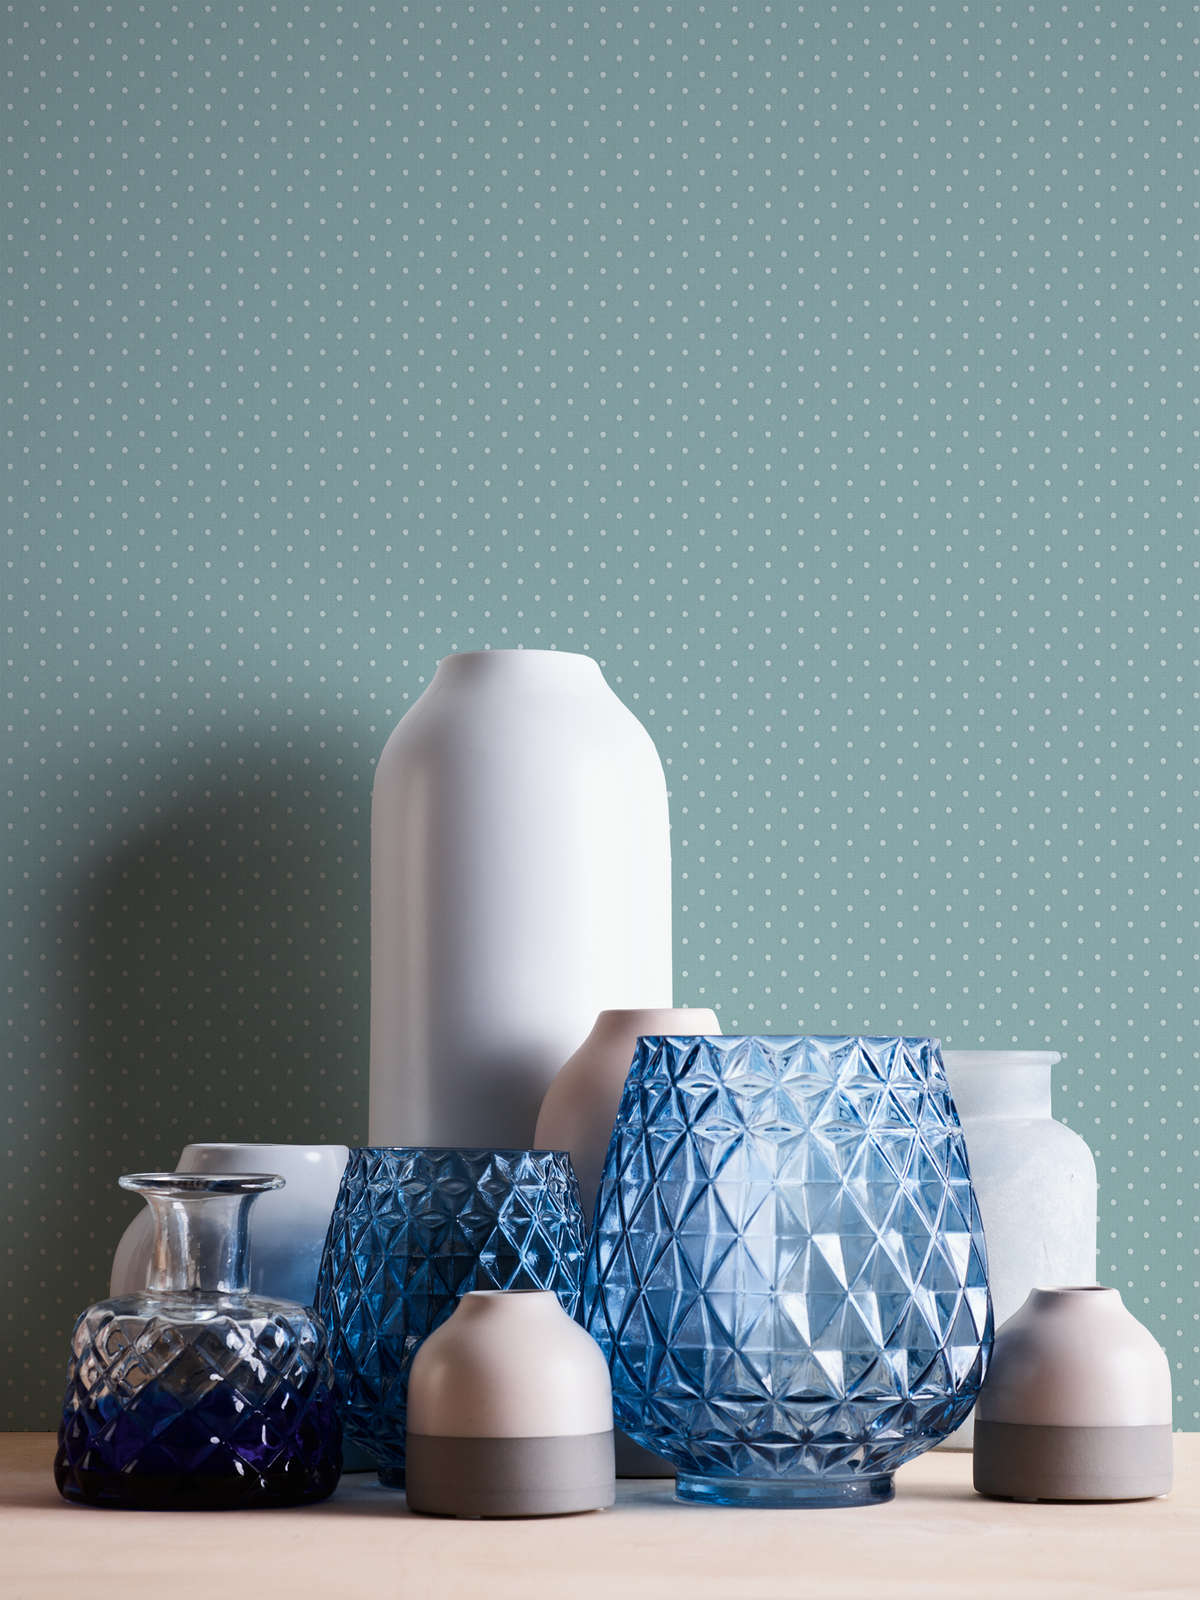             Non-woven wallpaper with small dot pattern - blue, white
        